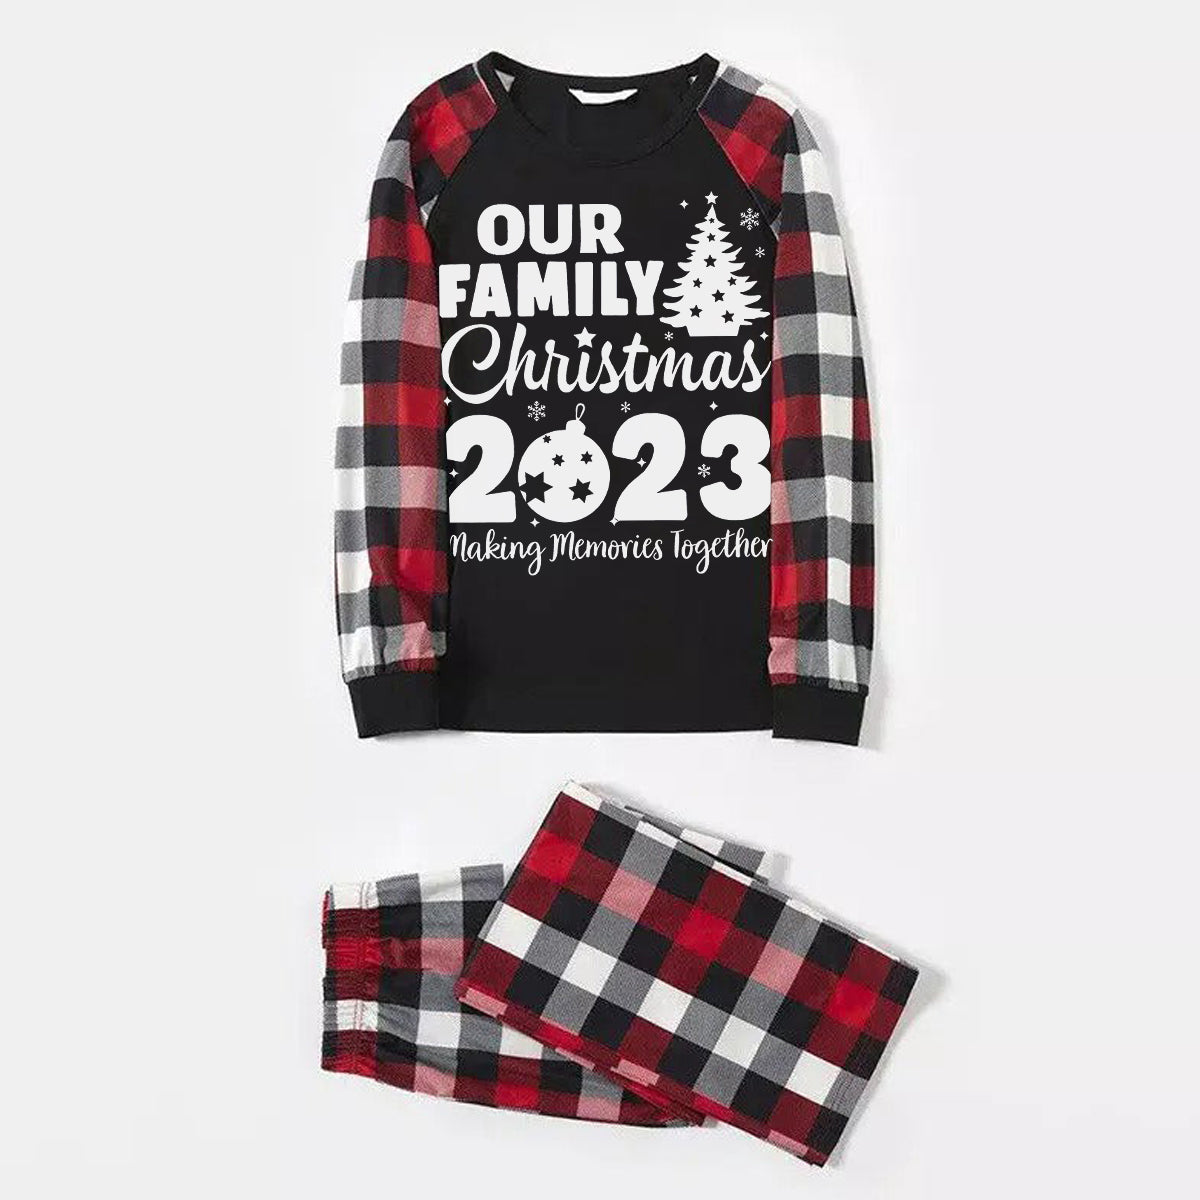 Christmas Tree & "Making Memories Together" Patterned Plaid Sleeve Contrast Tops and Red & Black & White Plaid Pants Family Matching Pajamas Set With Dog Bandana